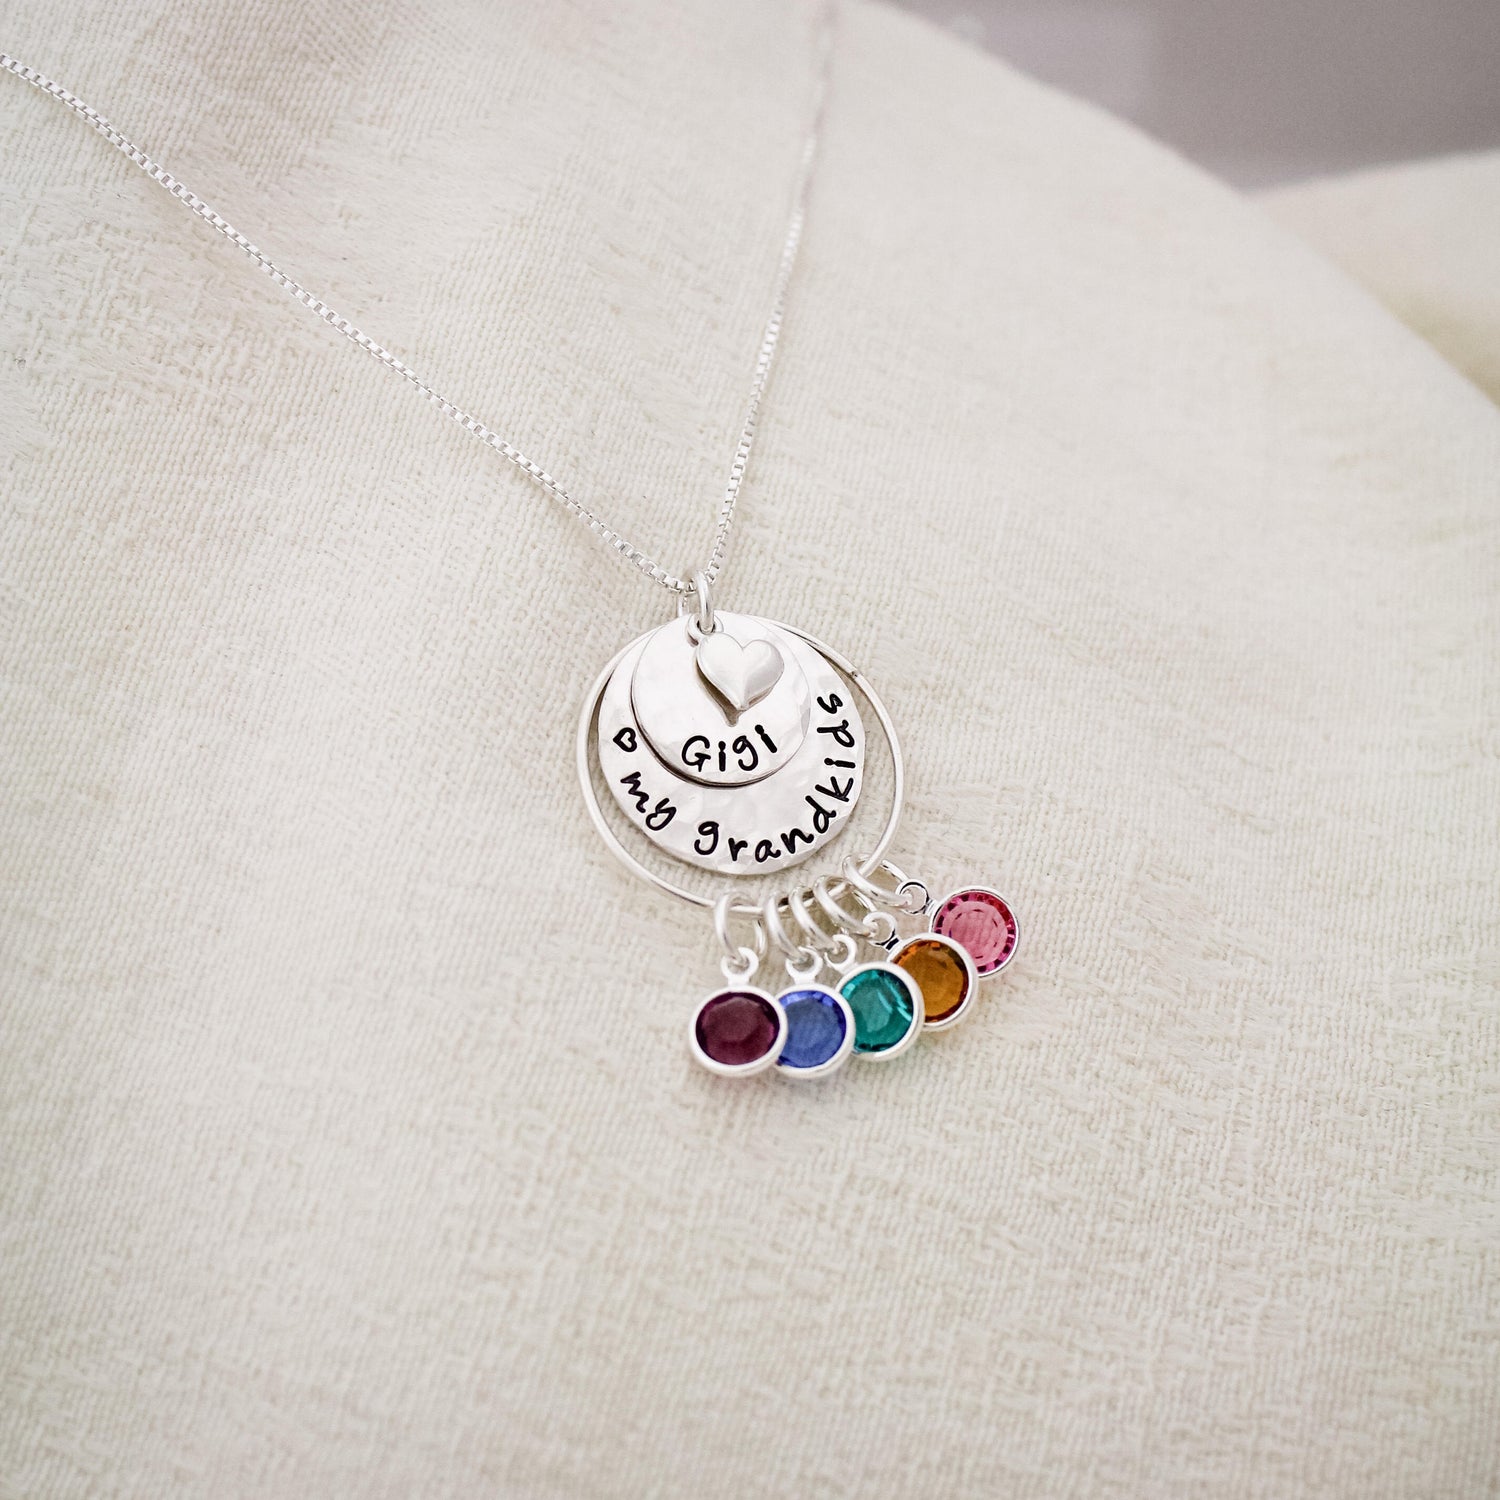 Personalized Family Tree Necklaces | 5 Birthstone Family Tree Pendant